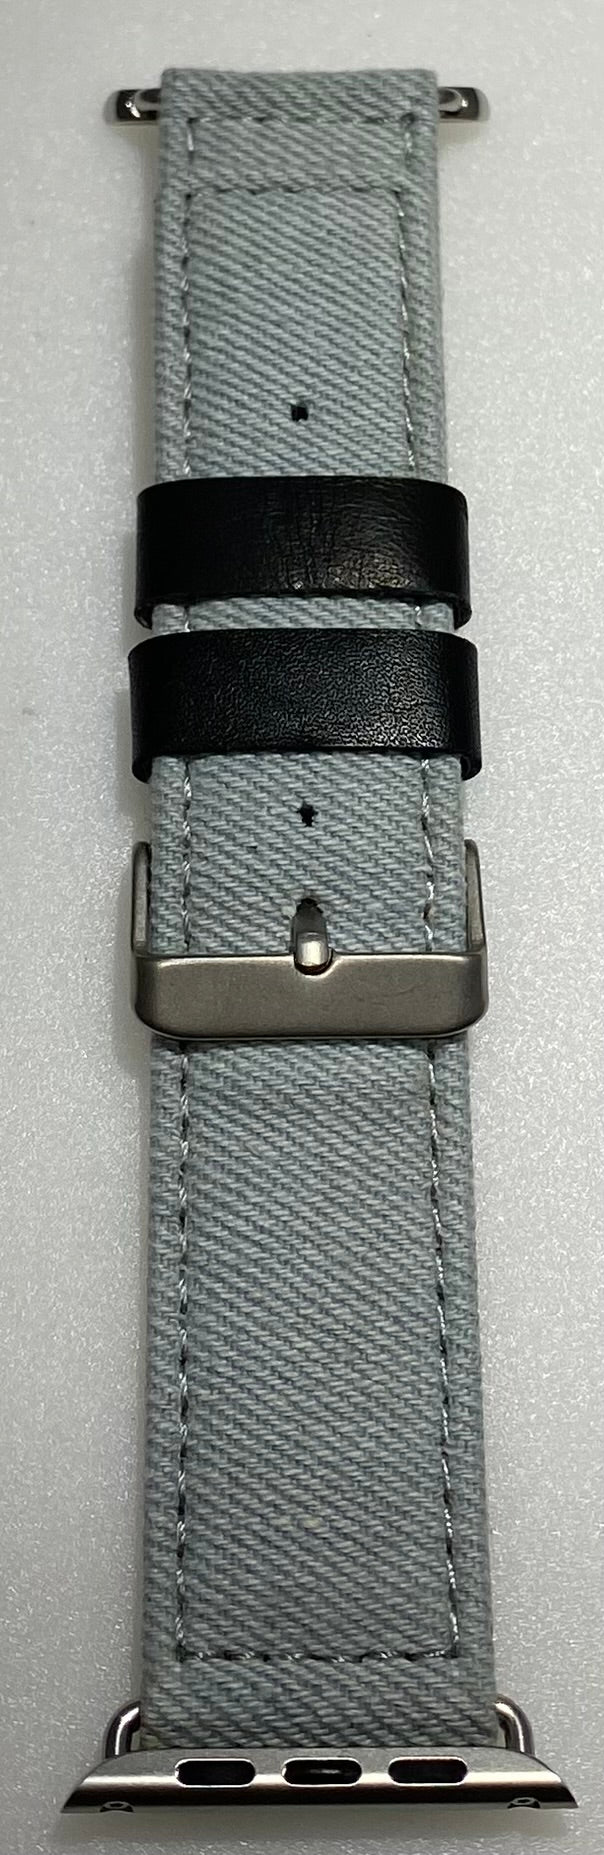 Apple iWatch Bands Canvas Jeans & Leathers Strap Fashion Watchband